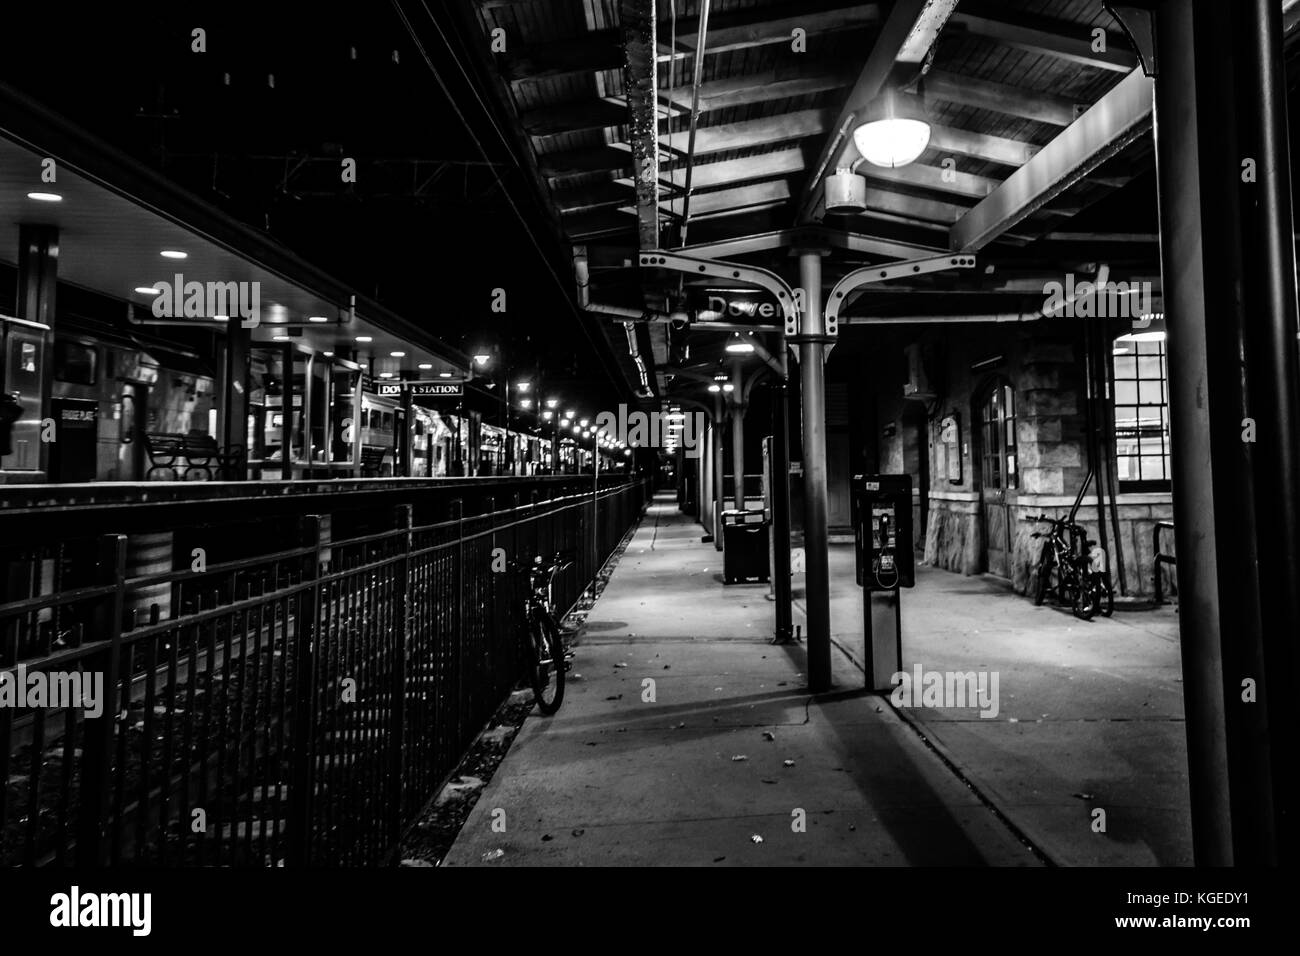 Dover, NJ USA - November 2, 2017:  Bicycles rest along the grungy train station at night, black and white Stock Photo